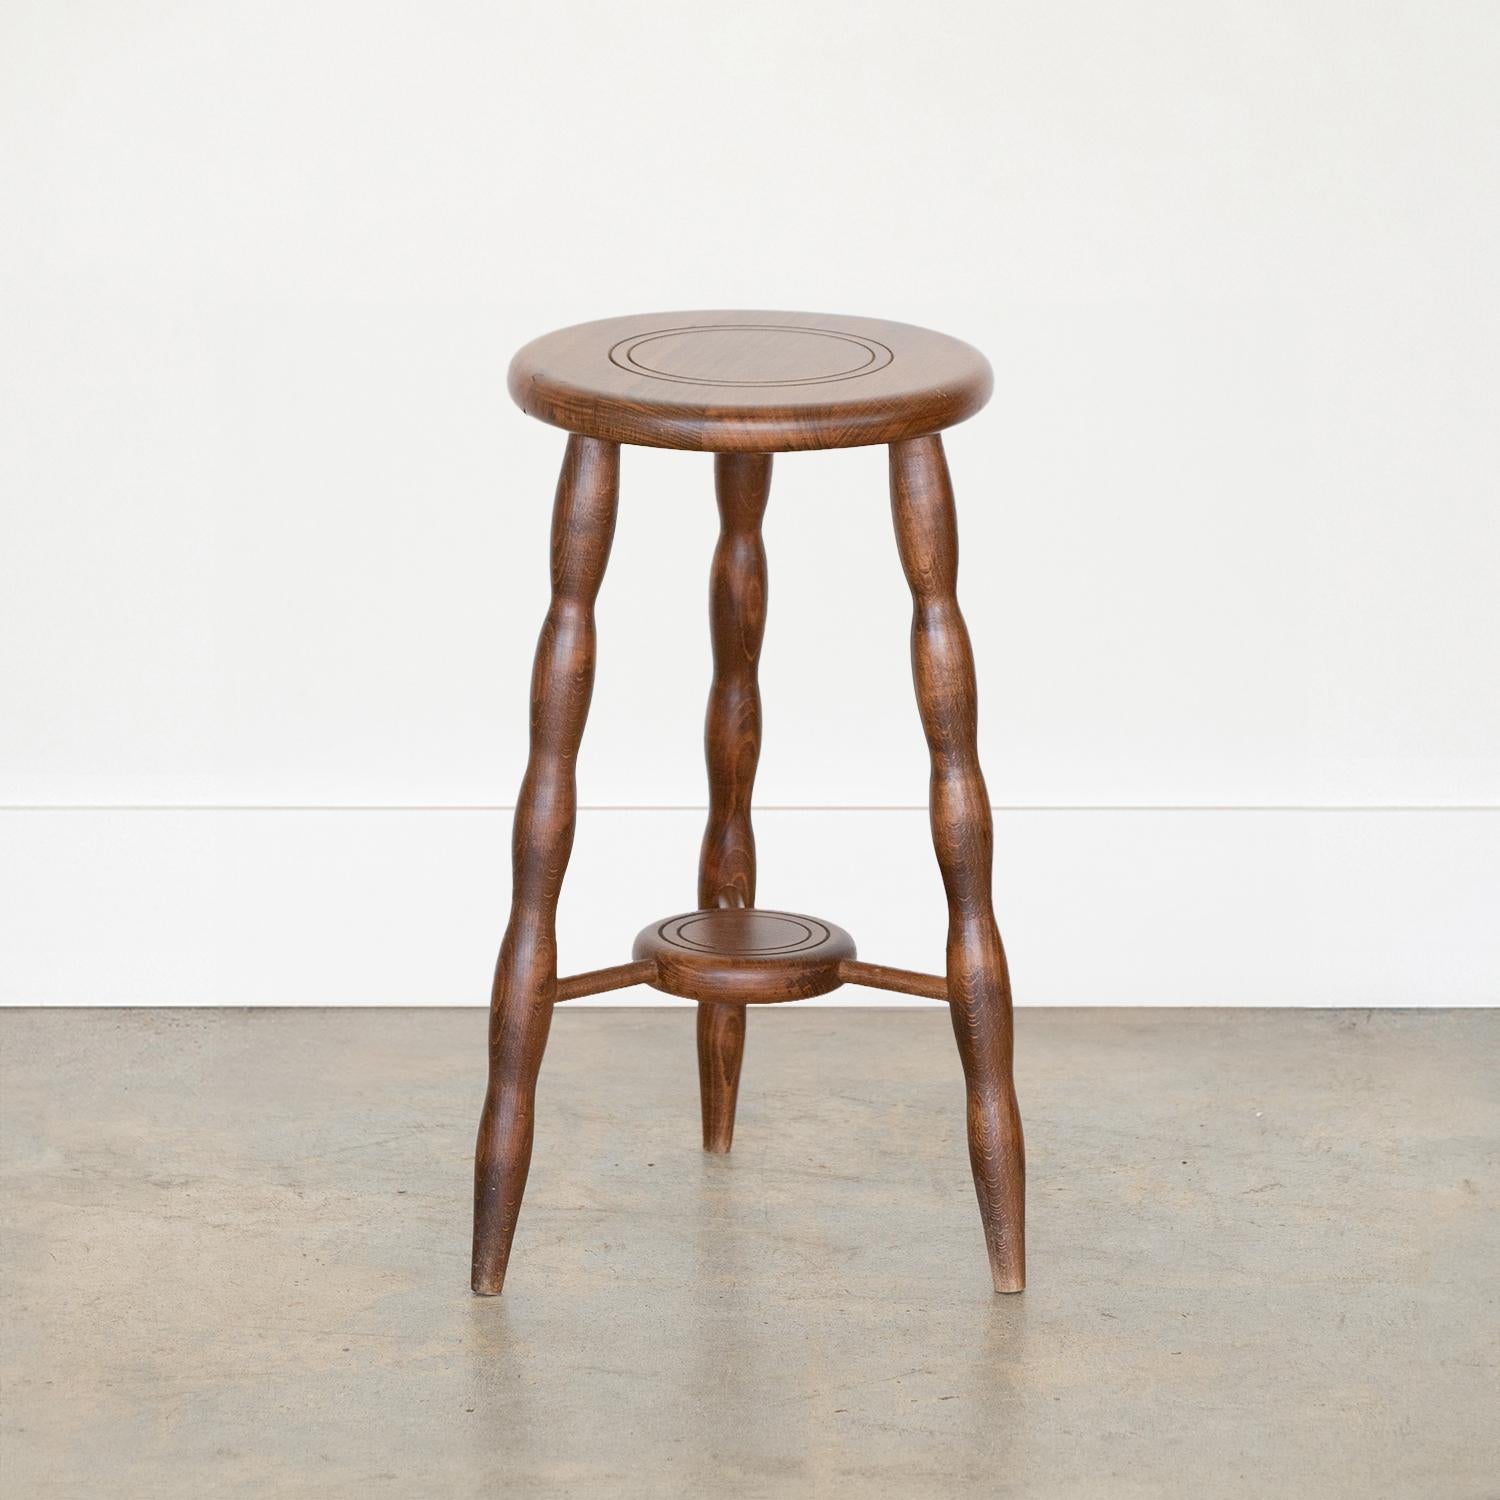 Great vintage wood tripod stool from France, 1950s. Circular top with carved ring detail and three wavy wood leg base with a lower wood disc. Original condition shows signs of wear, age, and knicks in wood. Perfect as small table next to chair or